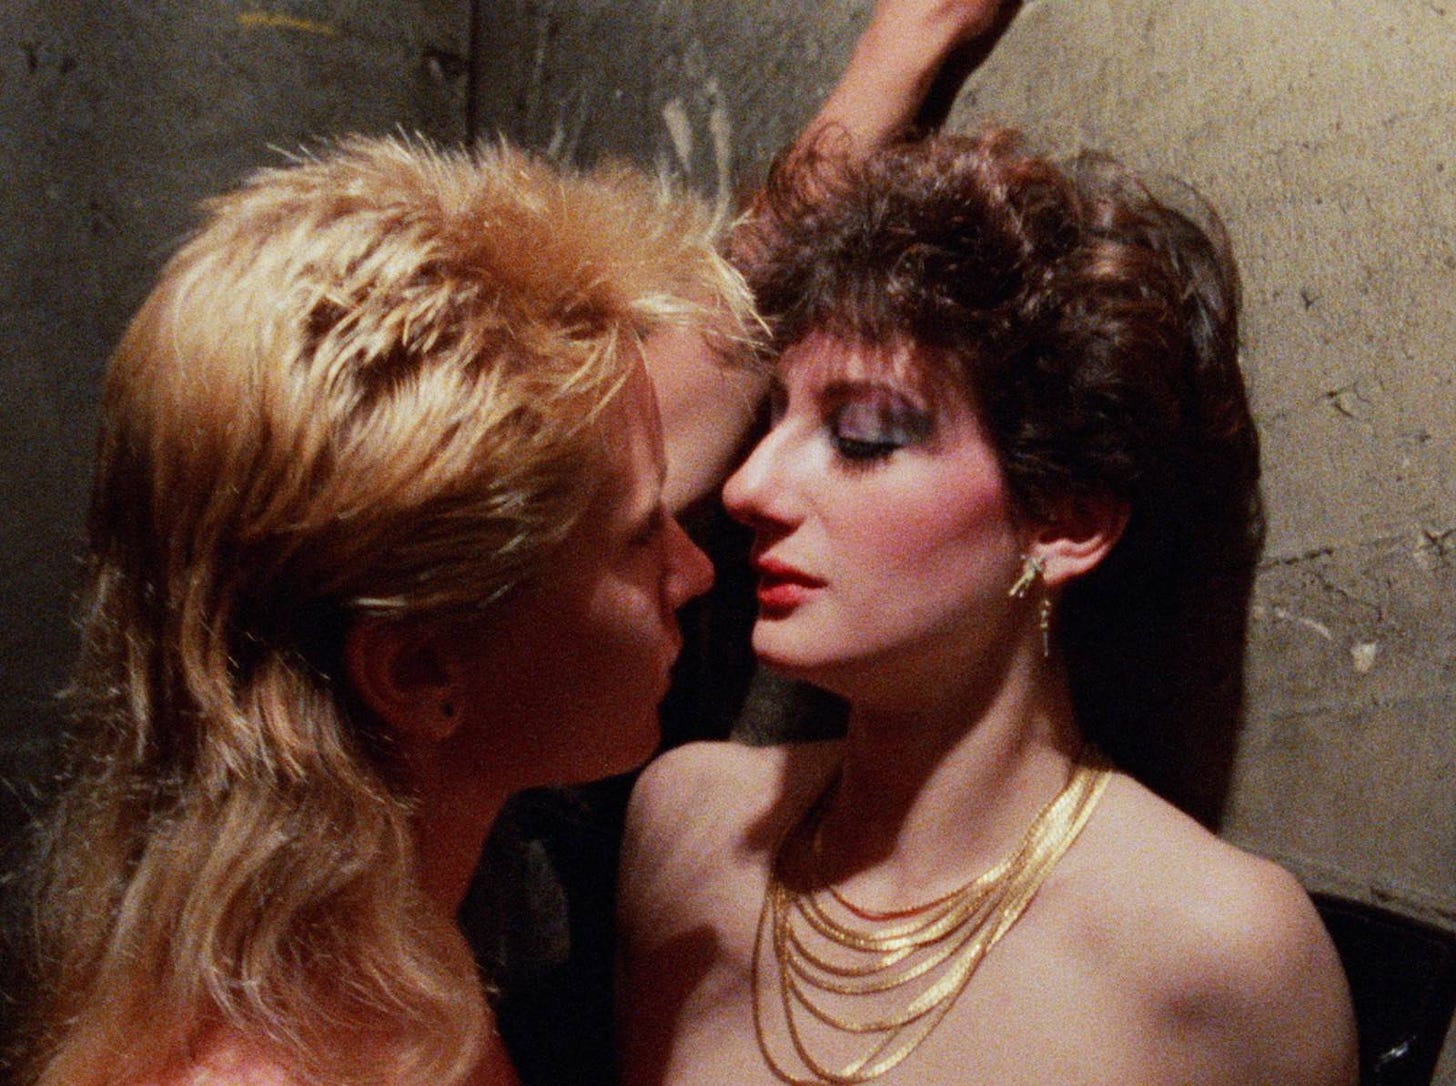 Sharon Mitchell and her girlfriend Tigr get close enough to kiss in Kamikaze Hearts (1986)